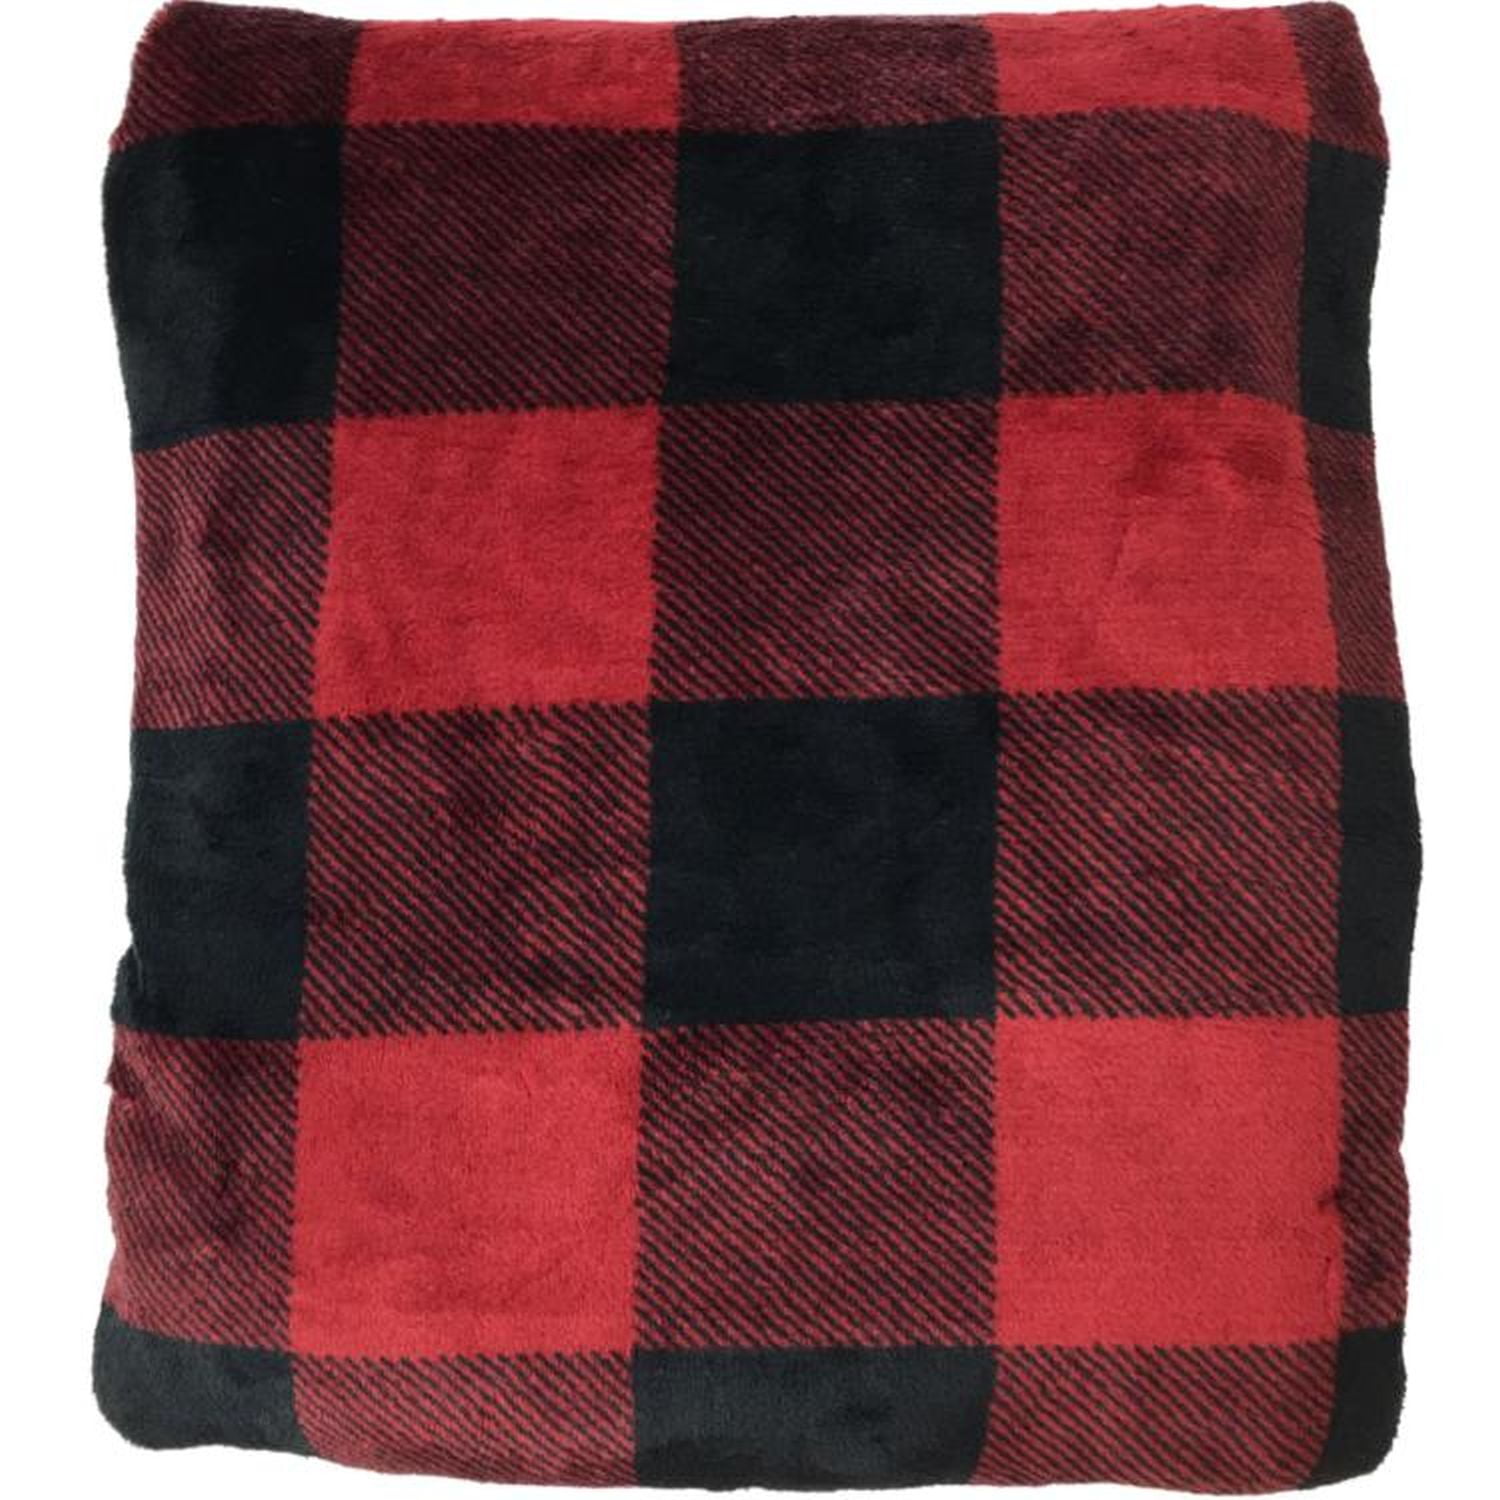 5 x 6 The Big One Oversized Throw HOLIDAY Blanket BLACK BUFFALO CHECK NEW 